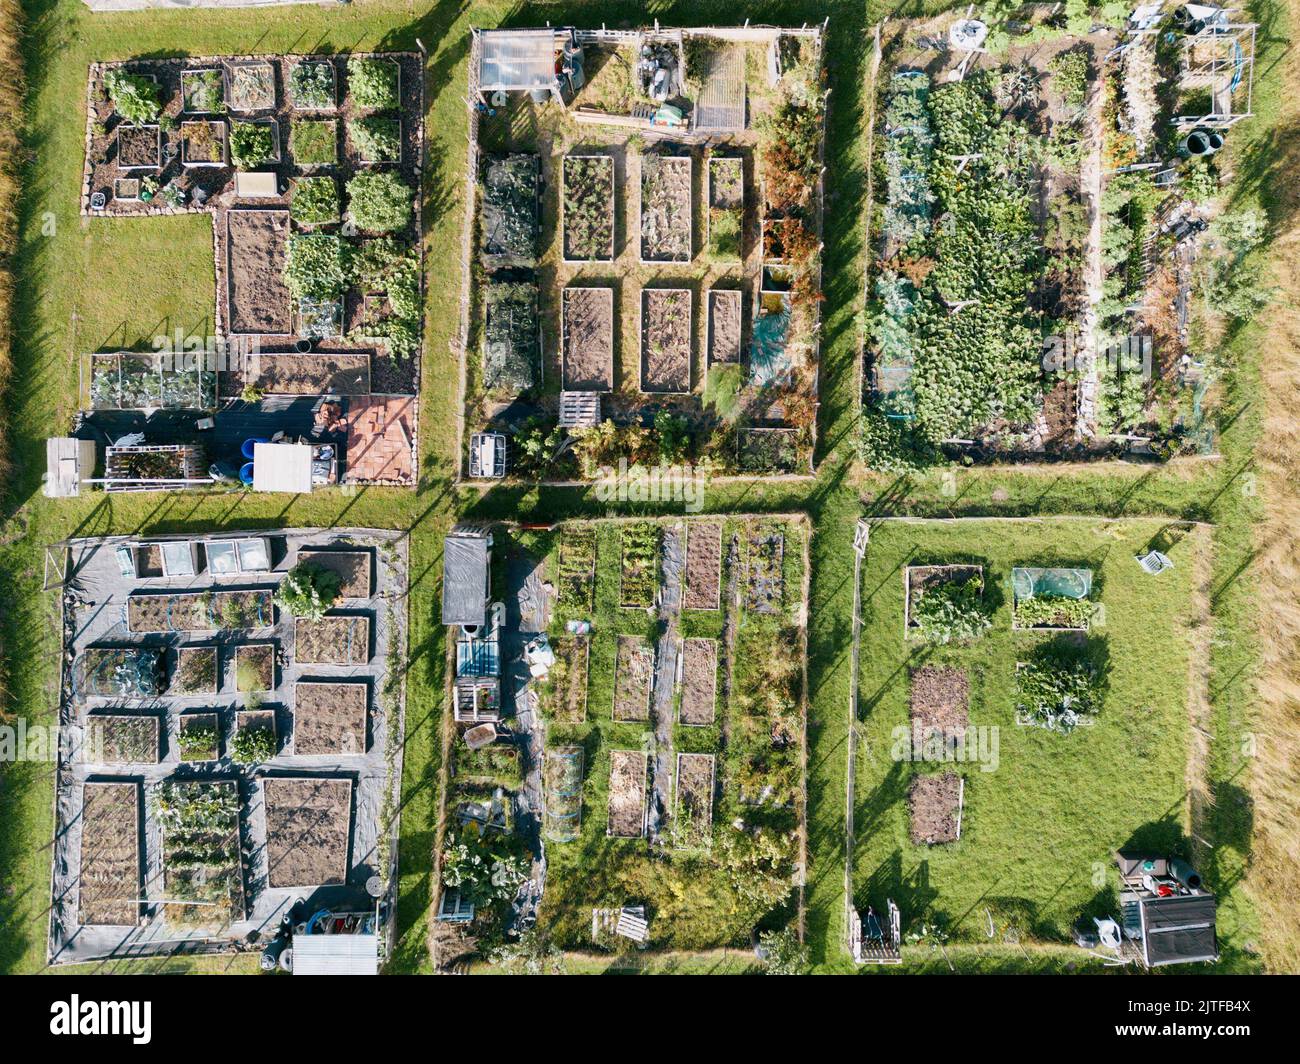 Aerial view of allotments for gardening vegetables Stock Photo